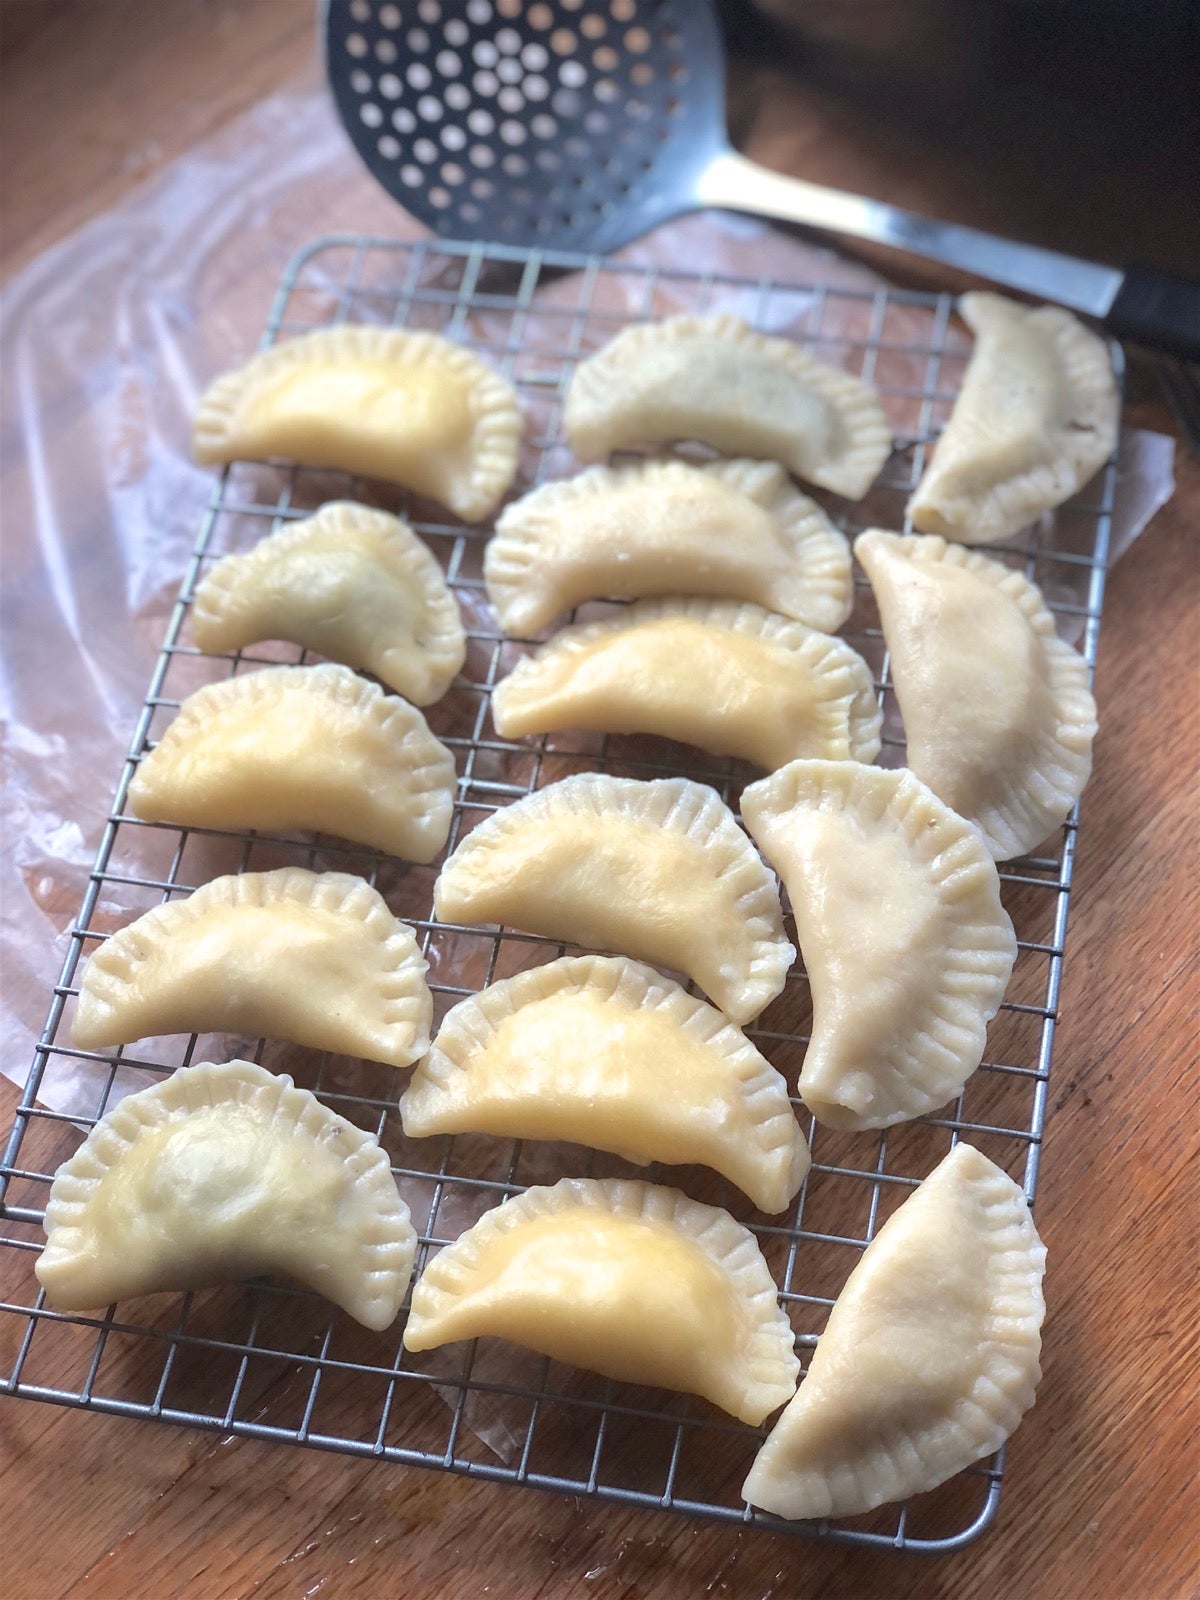 Boiled pierogi cooling on a rack prior to being fried with onions.